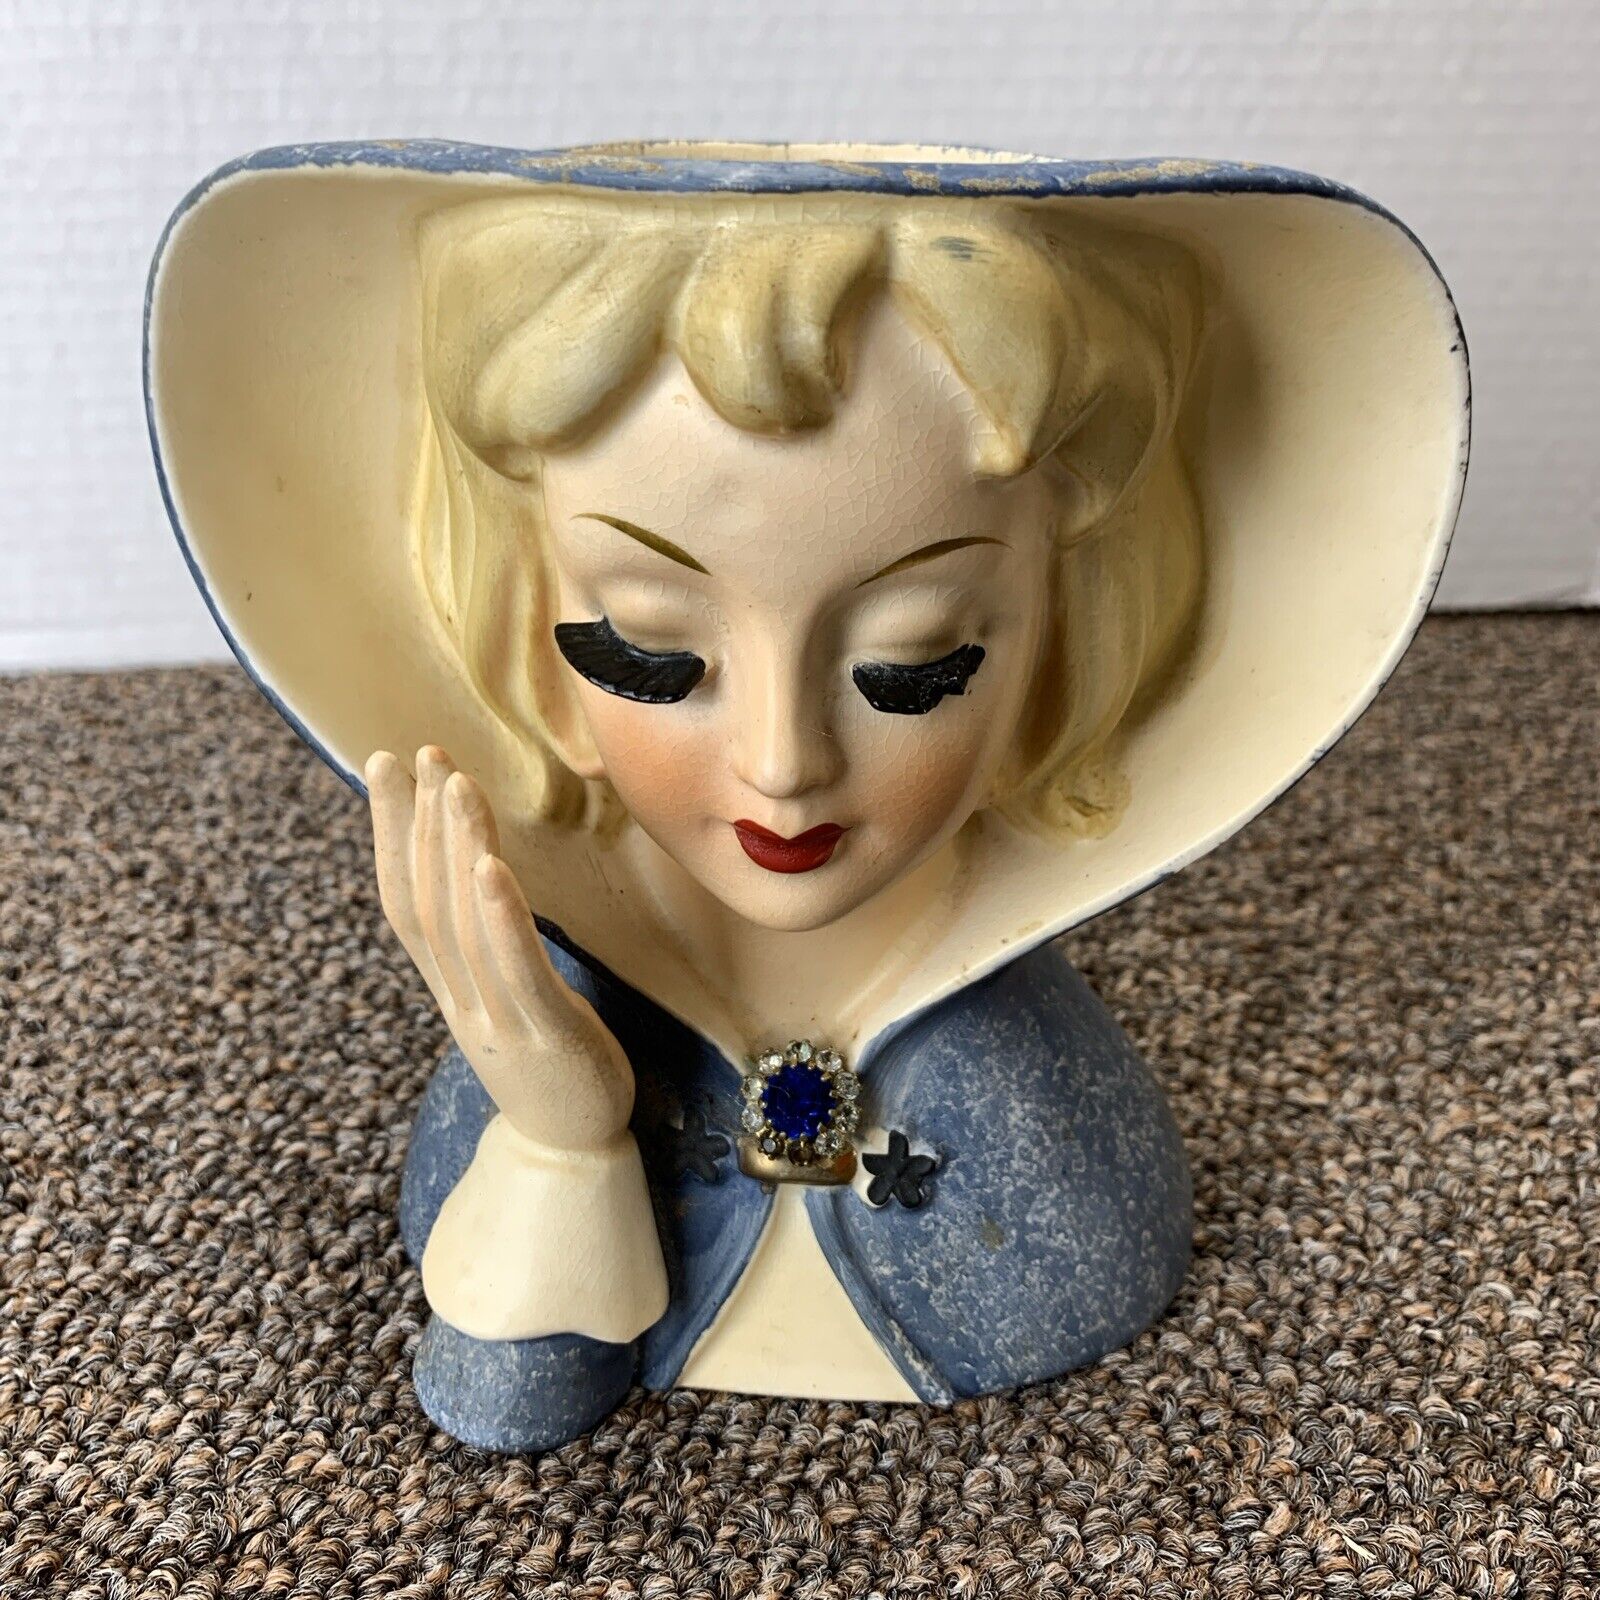 Vintage Lady Head Vase Blond Hair Wearing Blue Cape with Blue Bling Brooch MCM